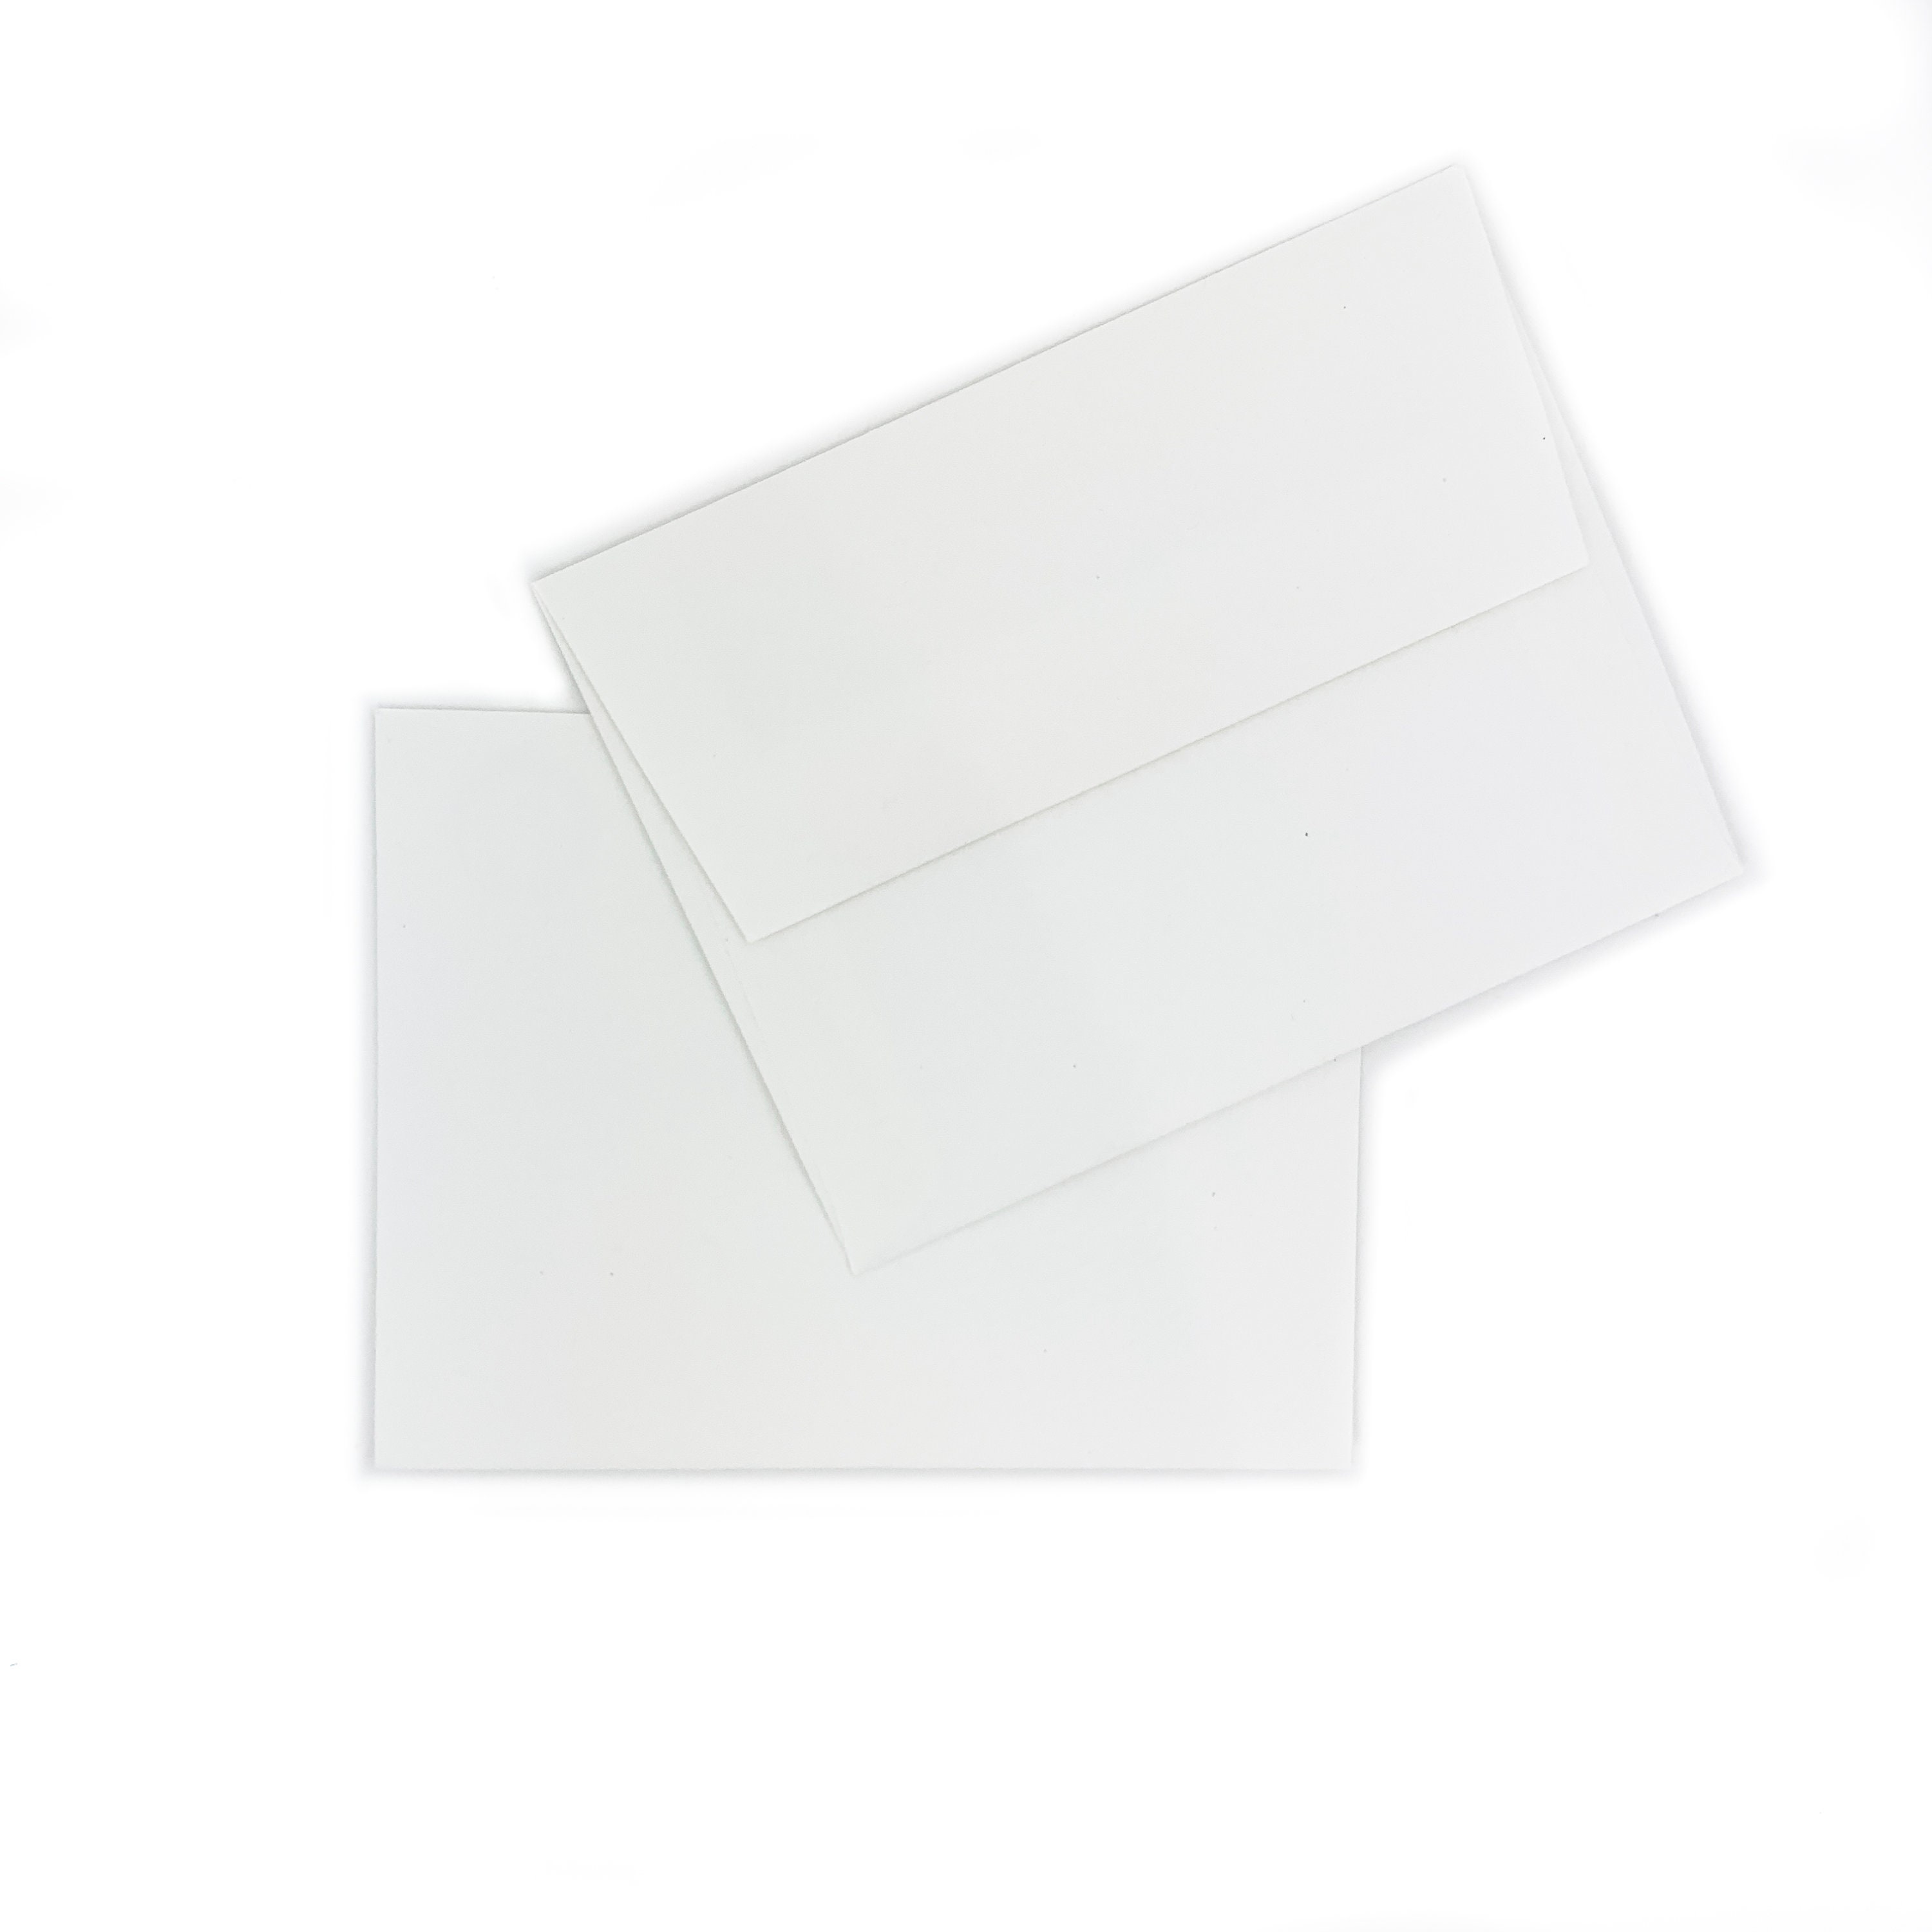 Neenah Classic CREST 130lb NATURAL WHITE Card Stock 8.5x11 25 Sheets 